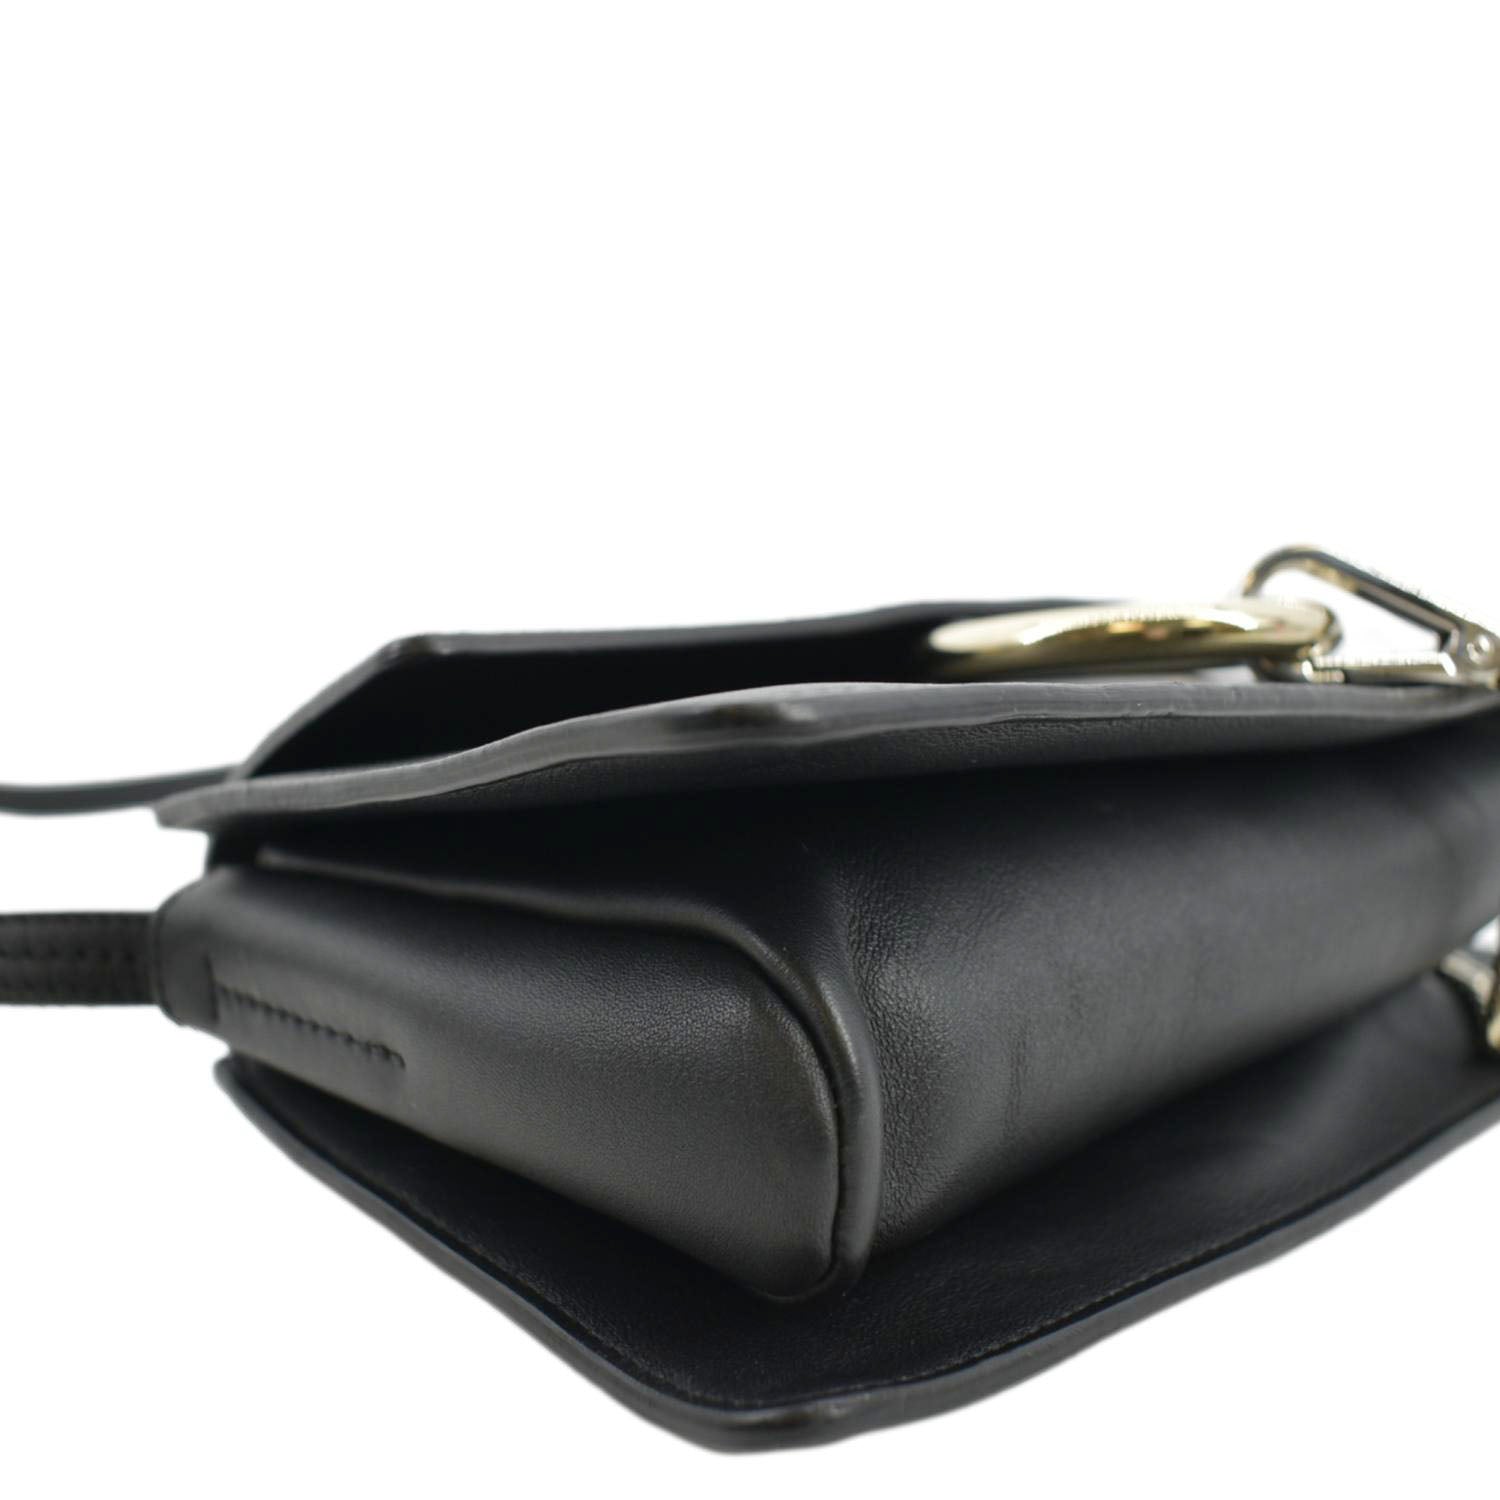 Small Faye Leather And Suede Shoulder Bag